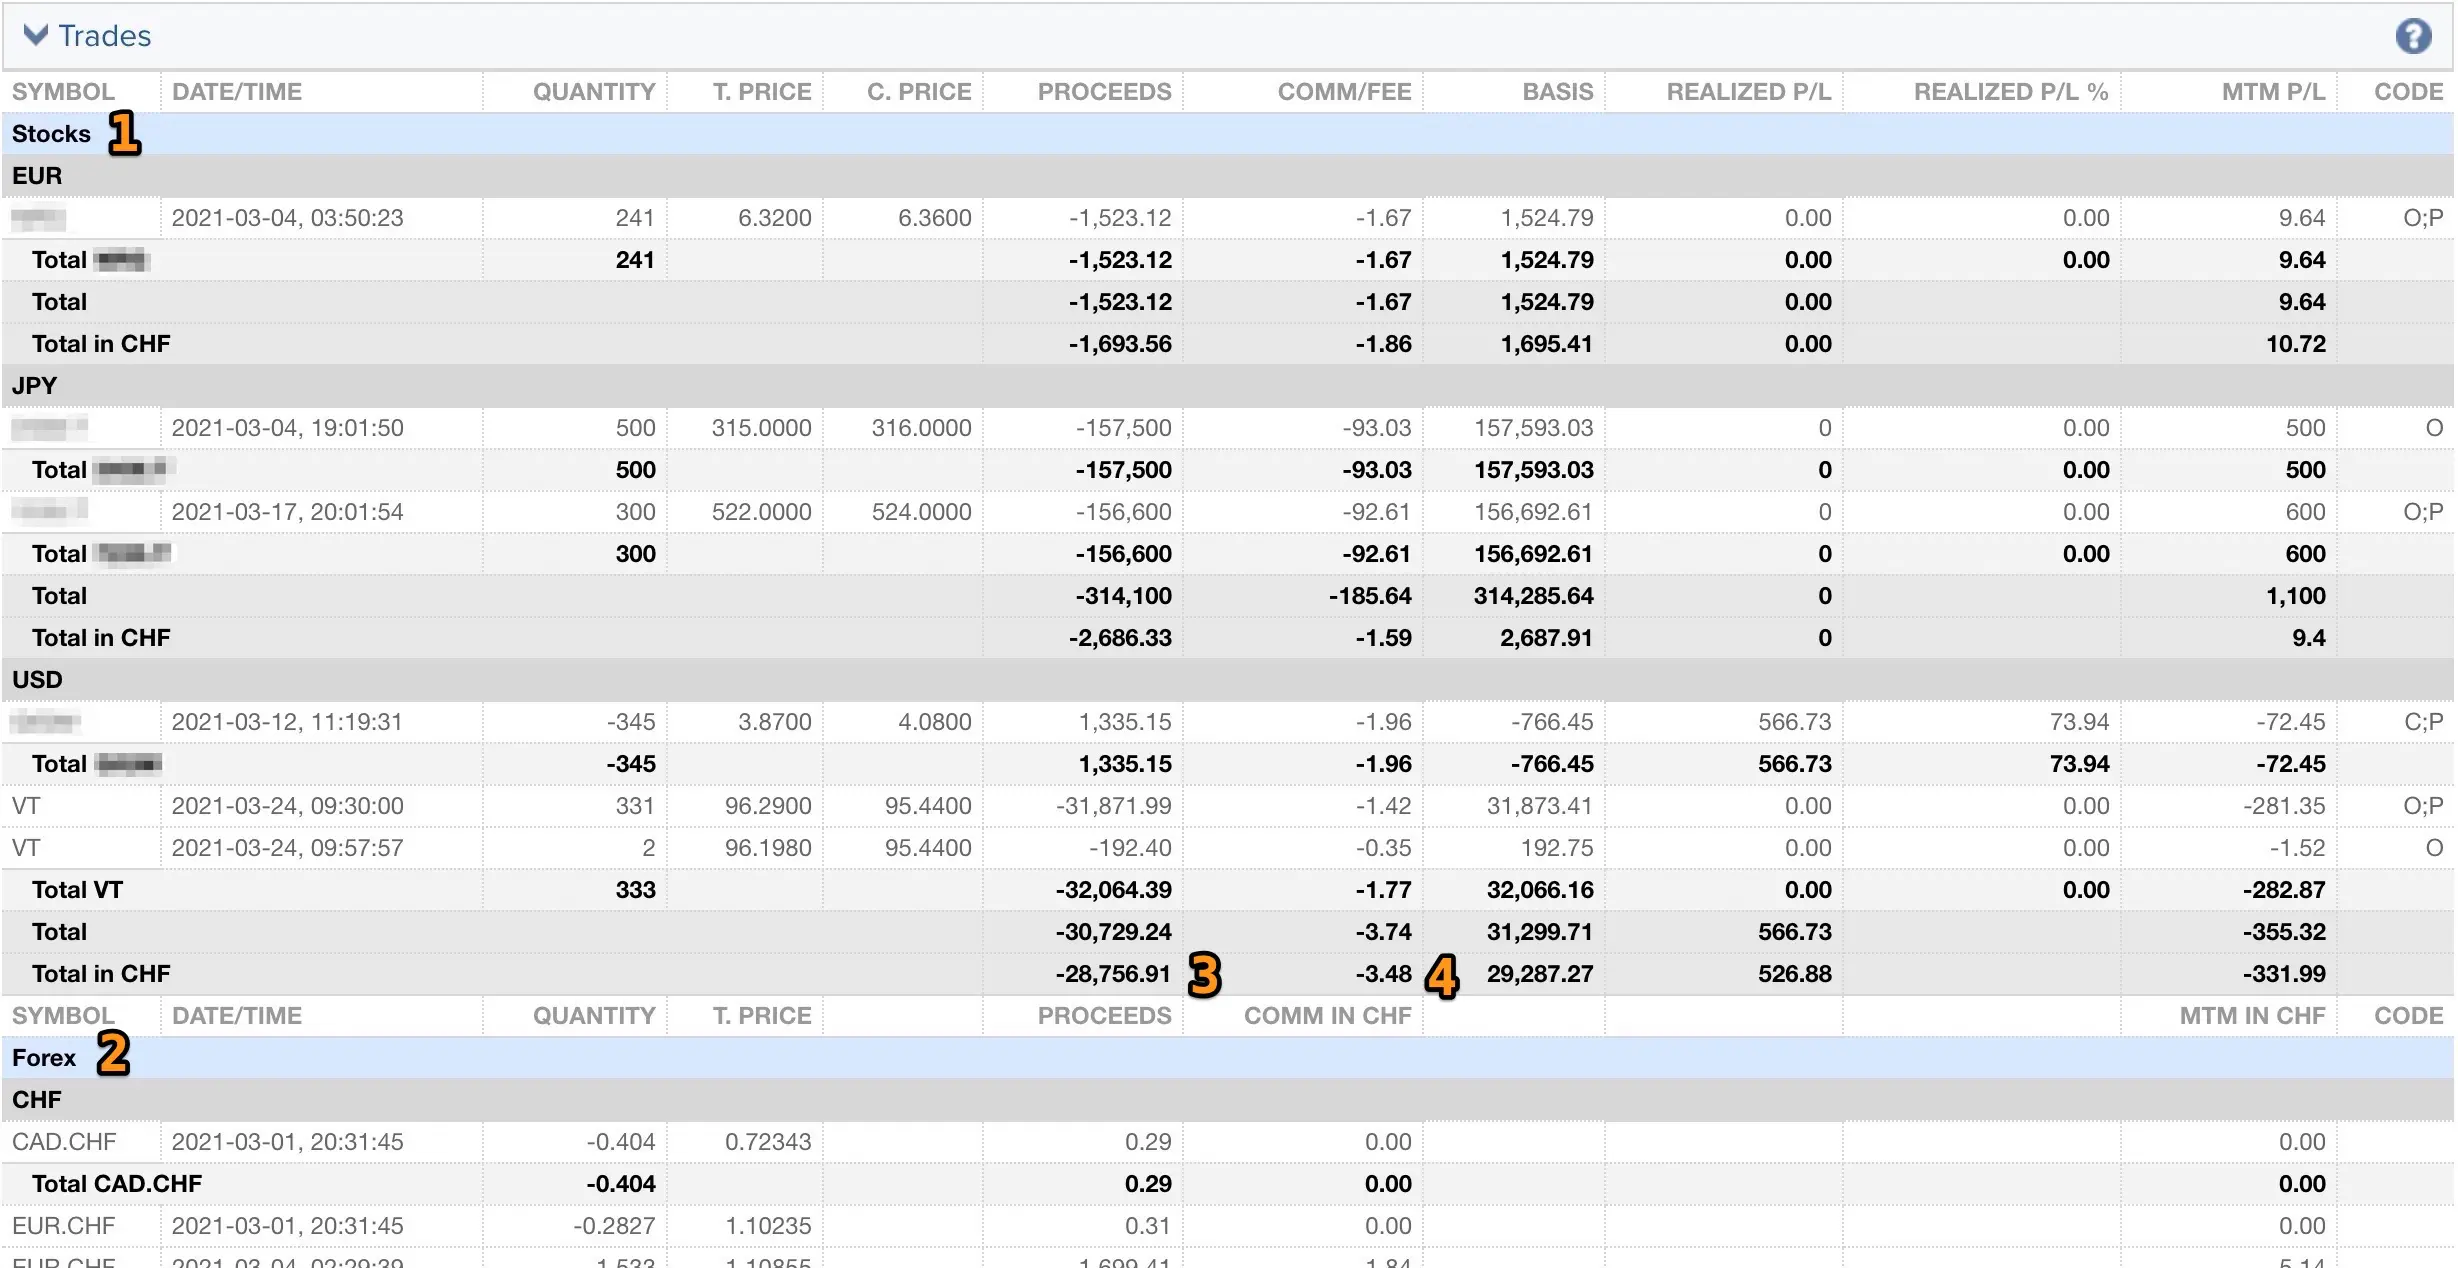 Stocks and currency trades on my Interactive Brokers activity report